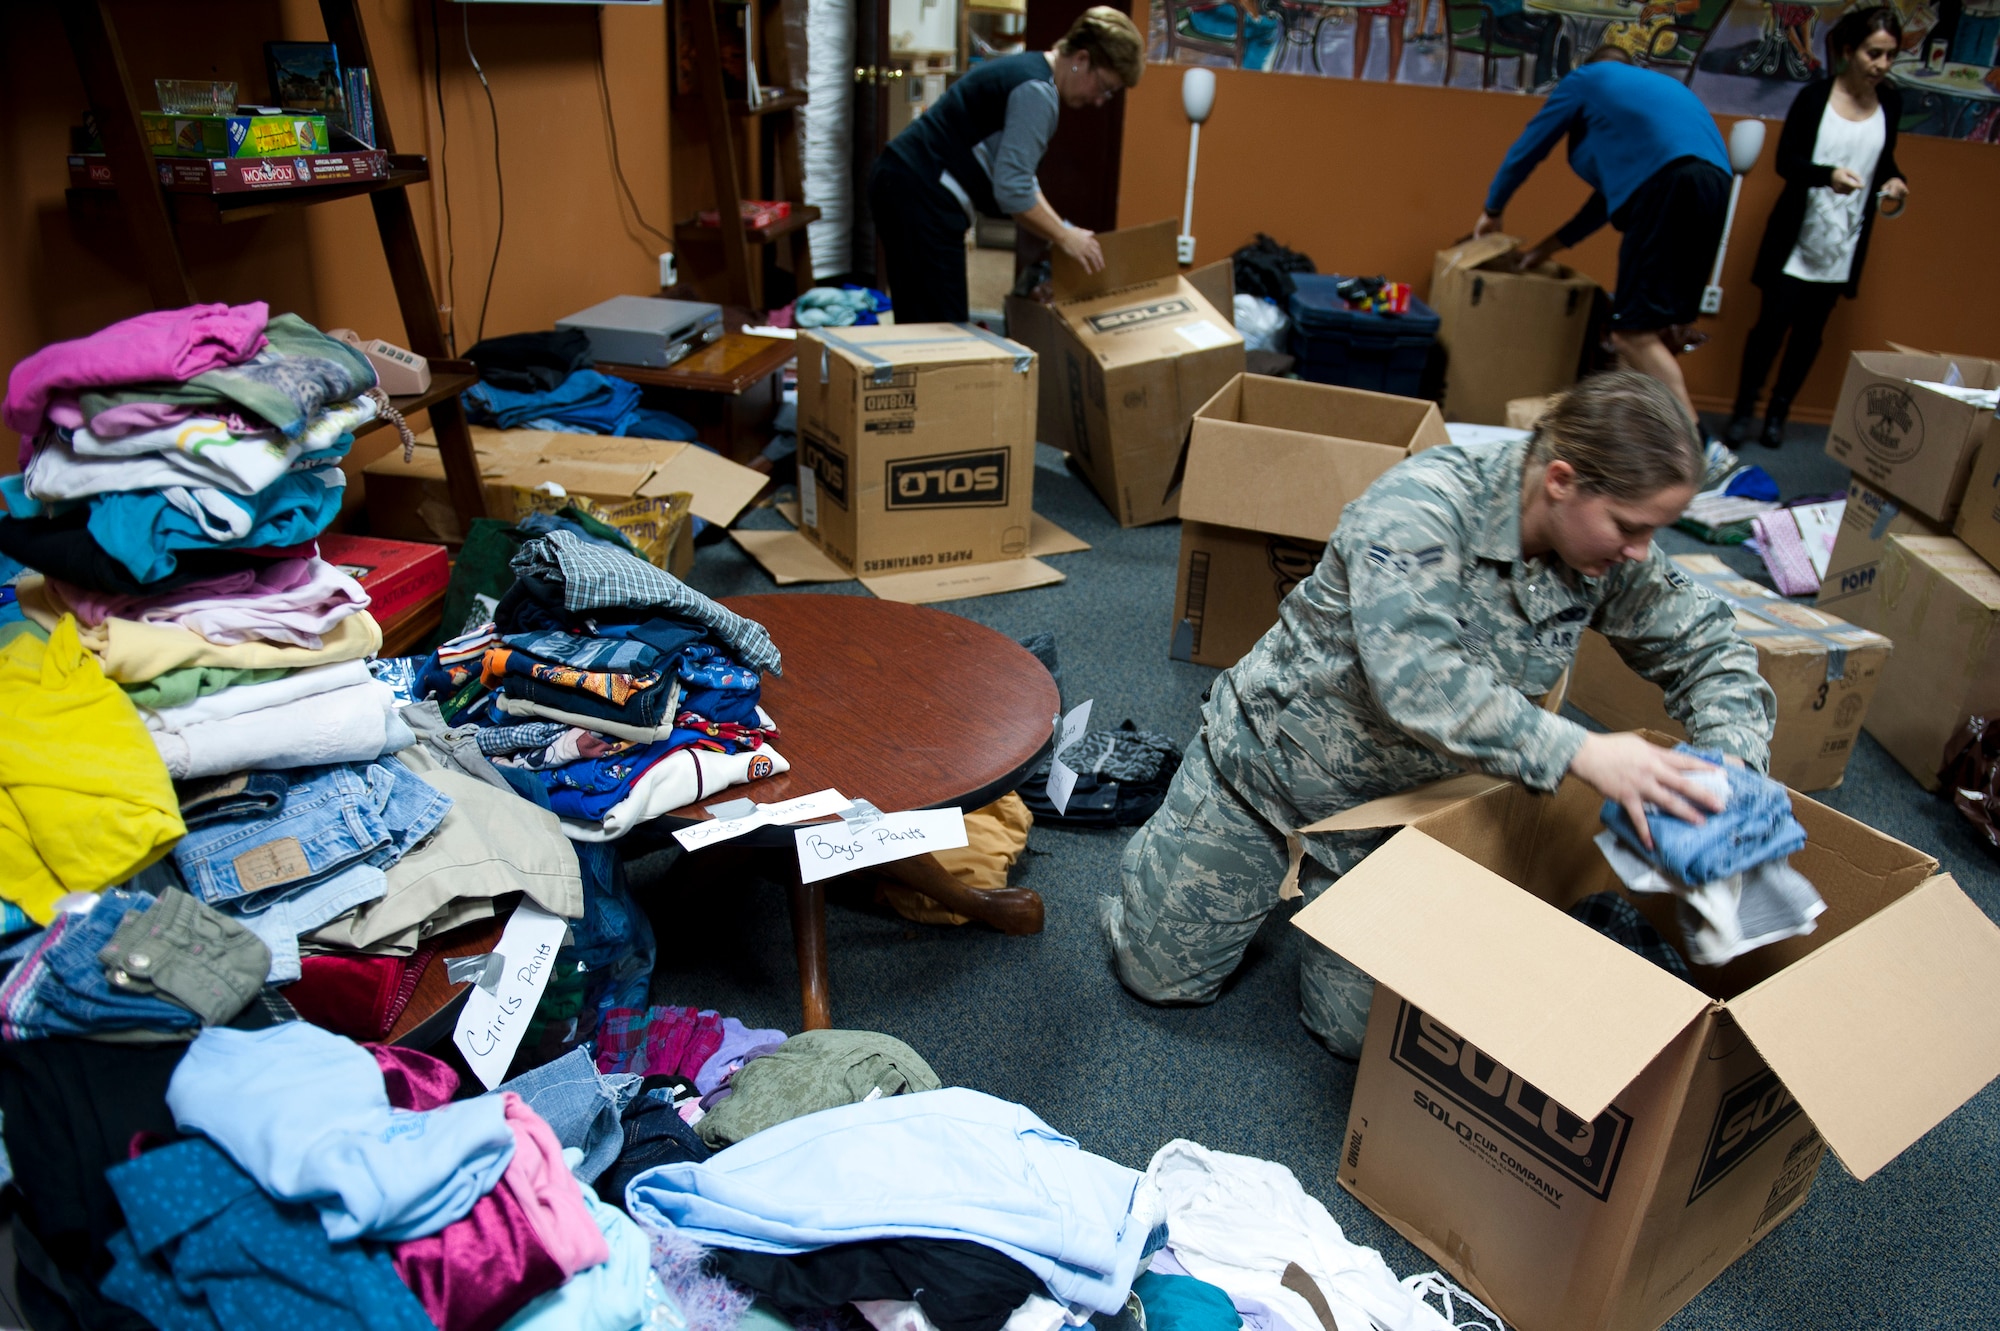 Airman 1st Class Bethany Kerr, 39th Security Forces Squadron, packs supplies for Turkish earthquake victims Nov. 18, 2011, at Incirlik Air Base, Turkey. On Oct. 23, a 7.2-magnitude earthquake occurred near Van, Turkey, killing more than 600 and injuring more than 1,000. The 39th Air Base Wing chapel coordinated the collection of basic hygiene items, winter clothing and footwear donated to the Turkish Red Crescent for those affected. (U.S. Air Force photo by Tech. Sgt. Michael B. Keller/Released)